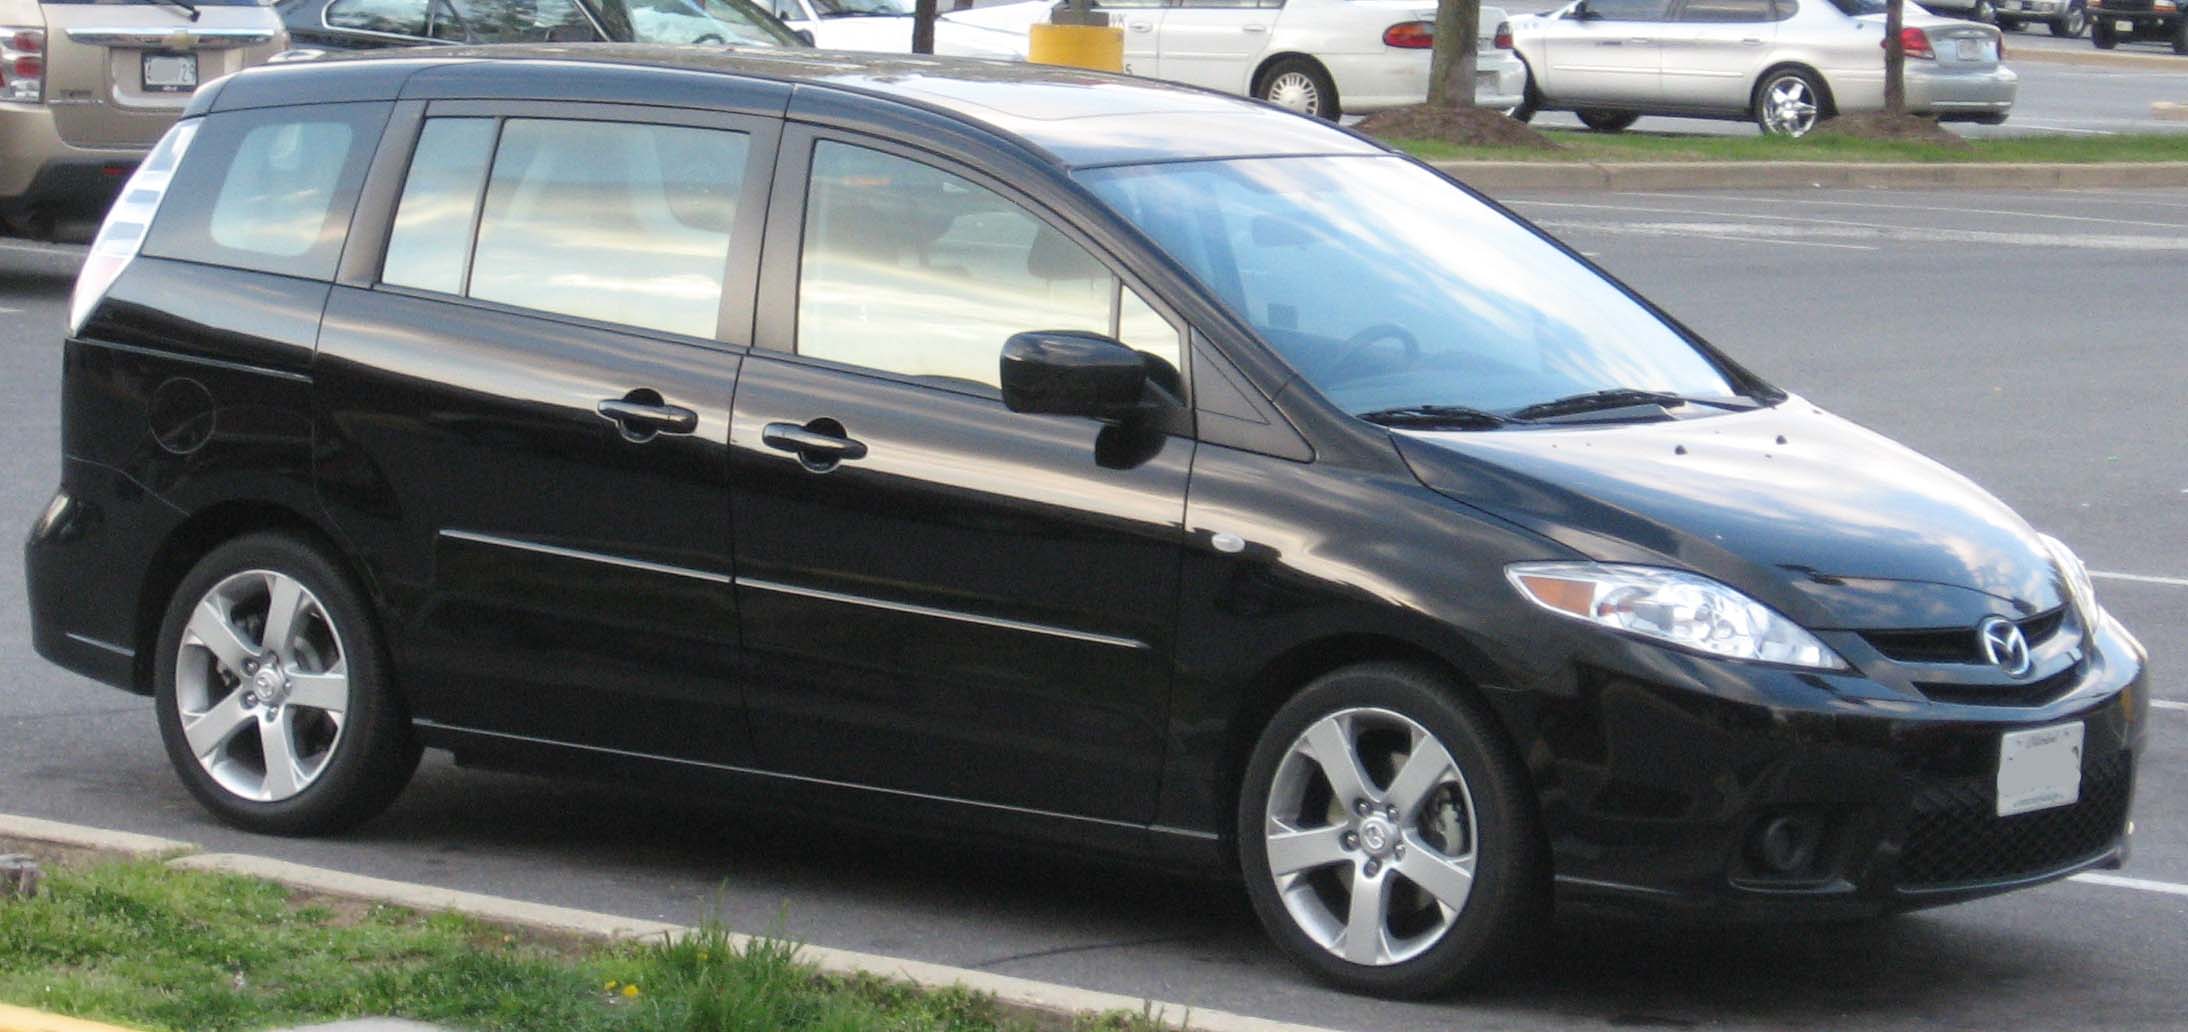 Mazda 5 was launched in 2005 to replace Mazda Premacy, the latest model was